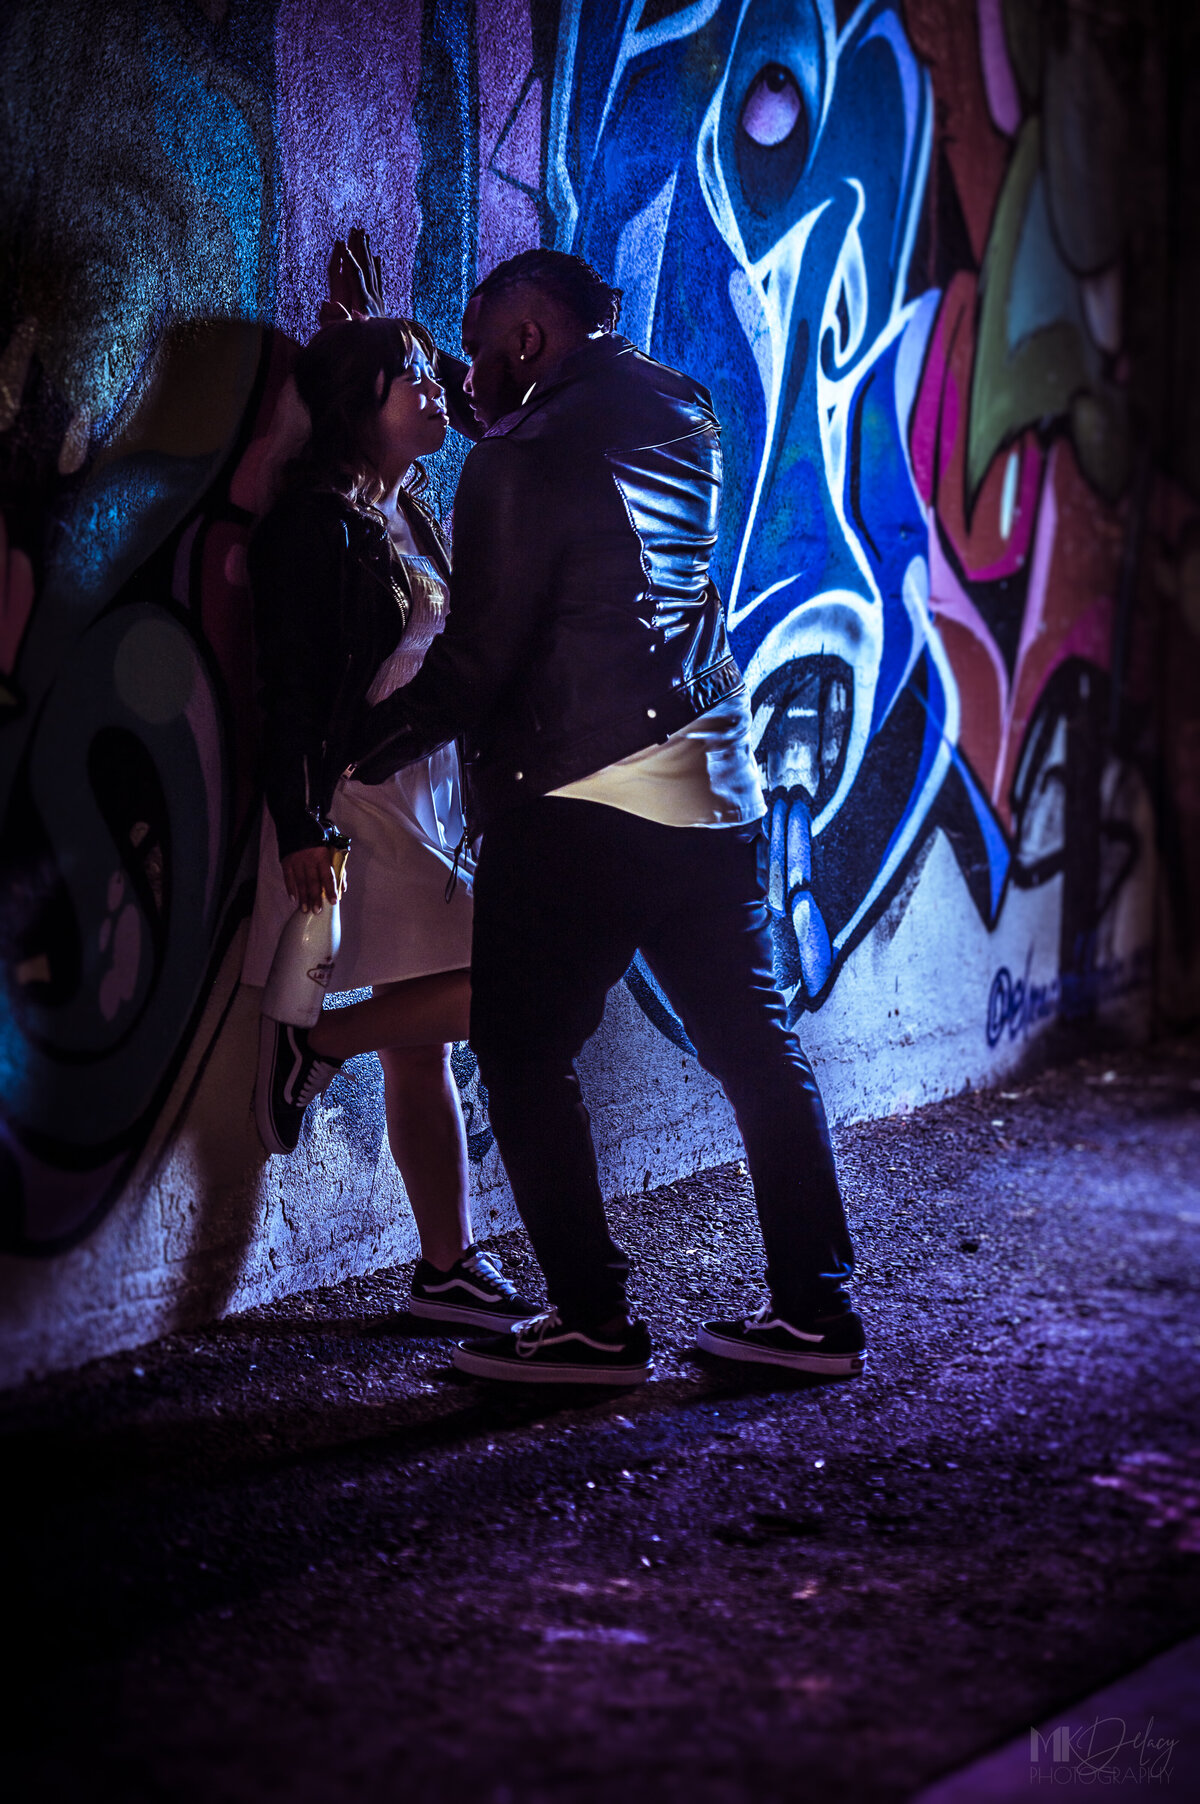 las vegas graffiti alley  groom leans in for kiss with bride pressed back against the wall  bride in white dress with black leather jacket grom in skinny jeans and white dress shirt with black leather jacket wearing  converse on Fremont st  las vegas elopement eloping in vegas  las vegas wedding photographers las vegas wedding photography mk delacy photography